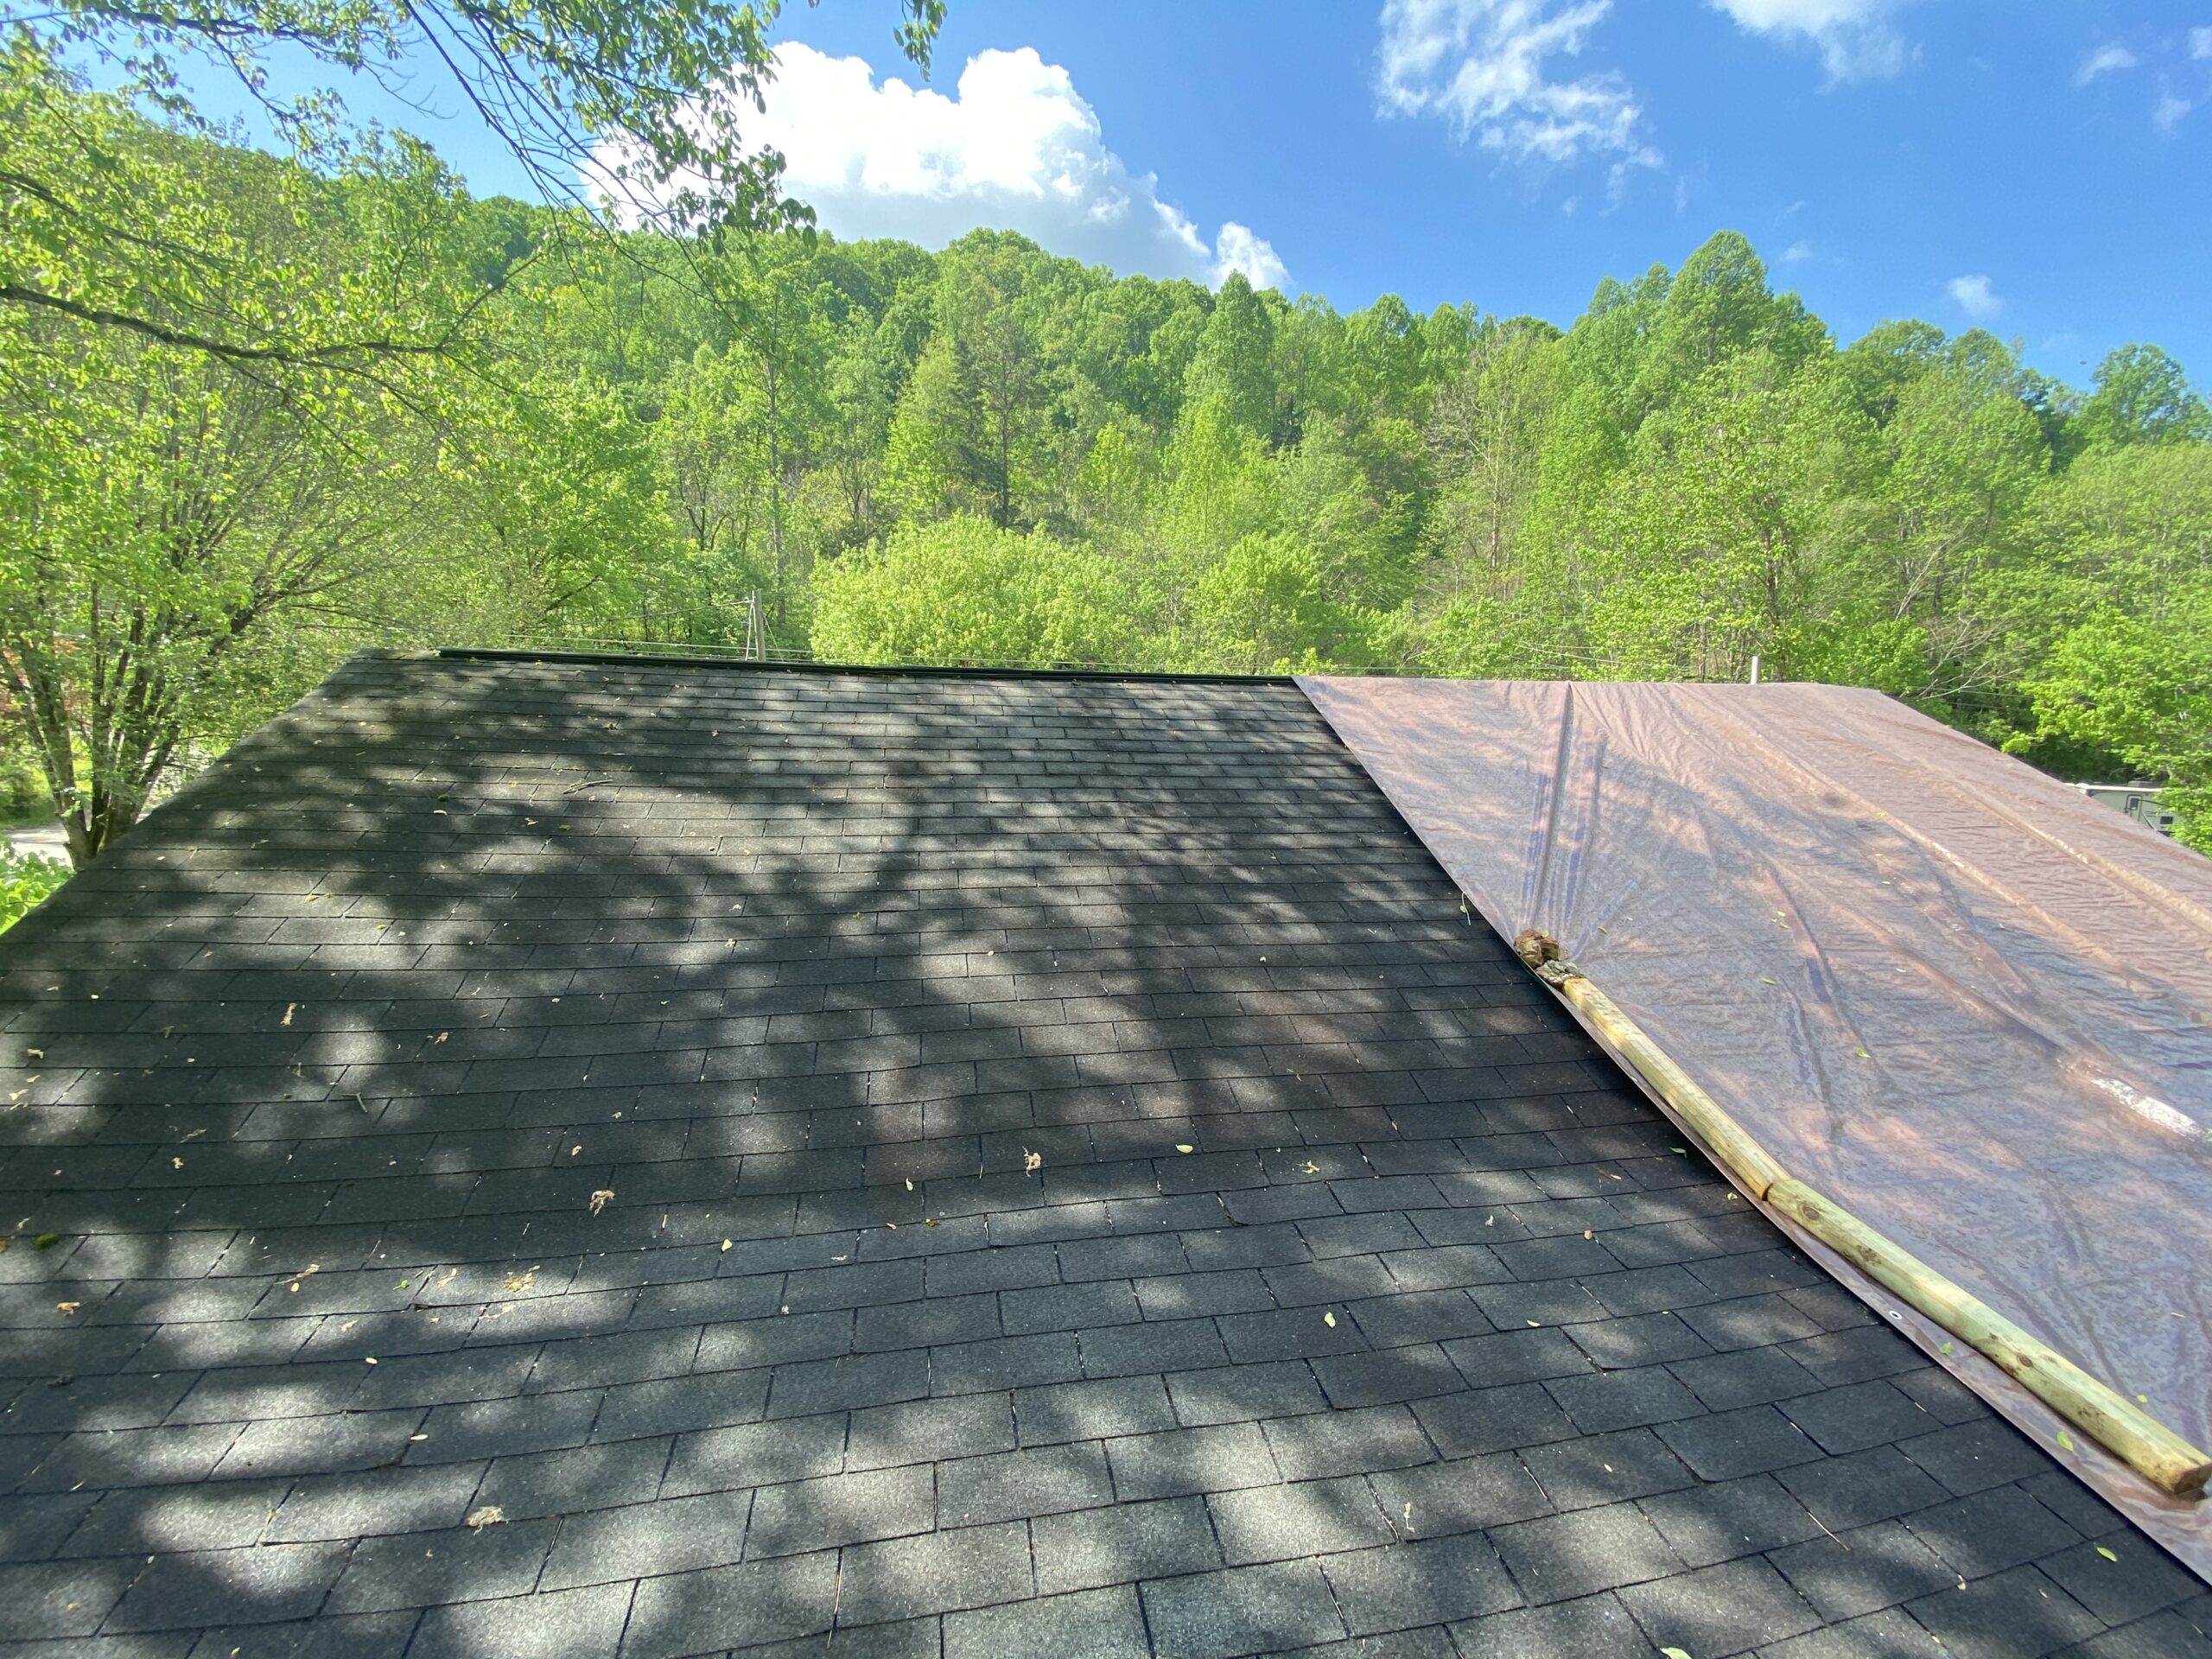 This is a picture of an old three tab roof with a tarp